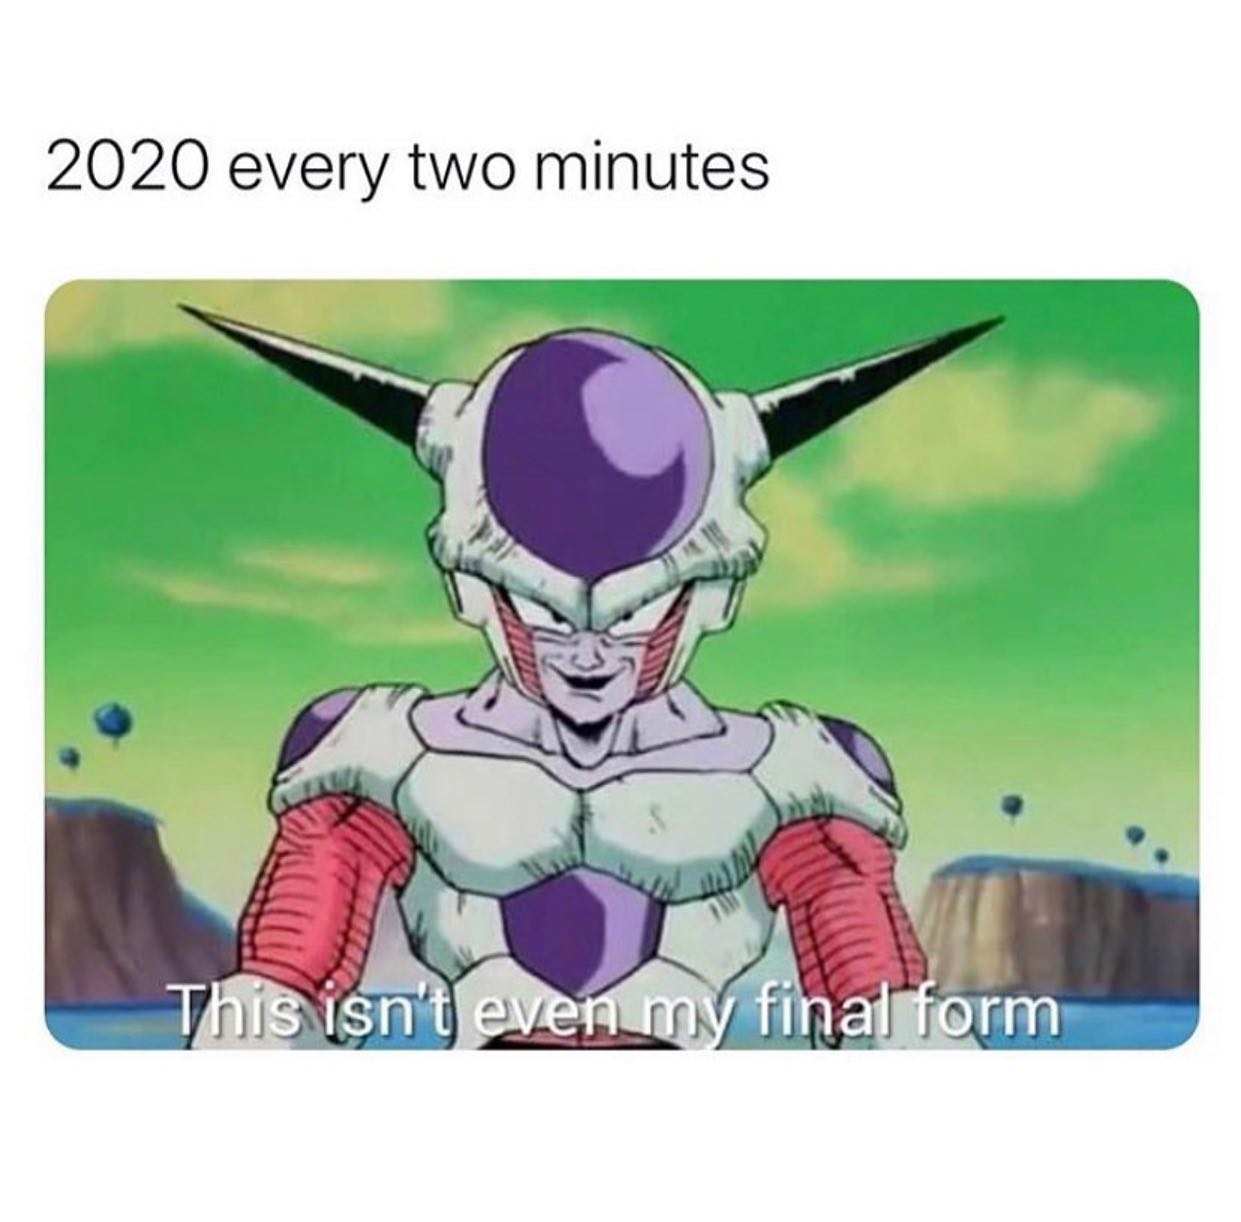 2020 dragon ball meme - 2020 every two minutes This isn't even my final form